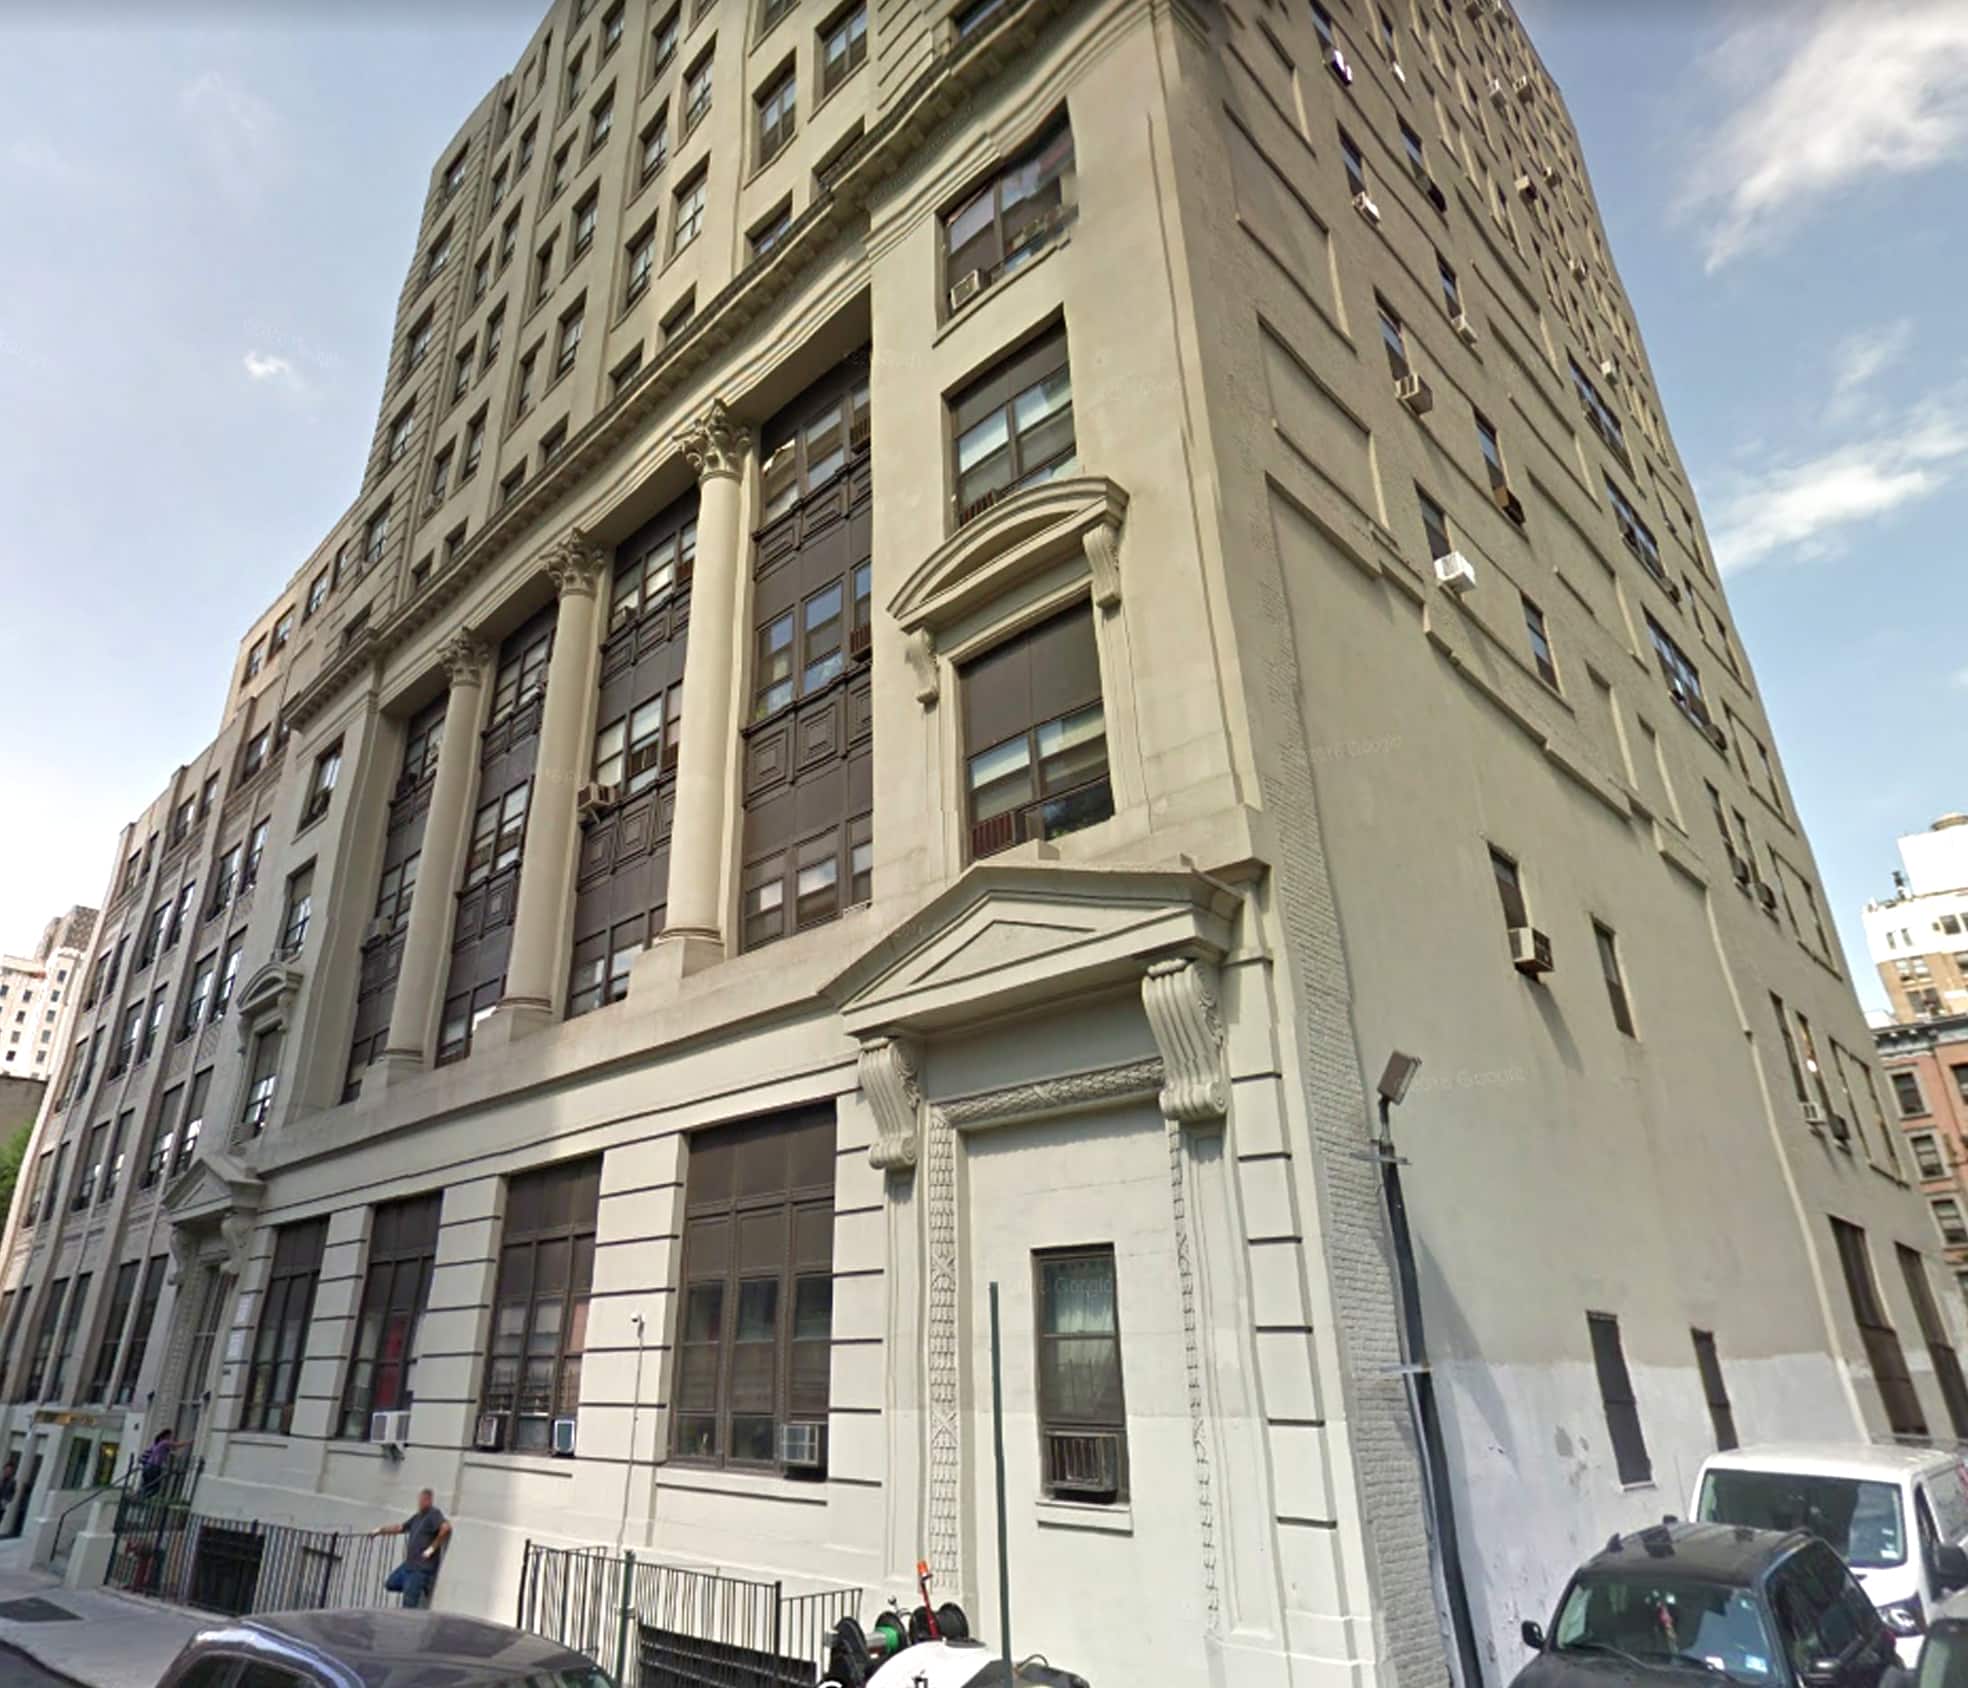 Affordable housing fund pays $110M for Hells Kitchen building